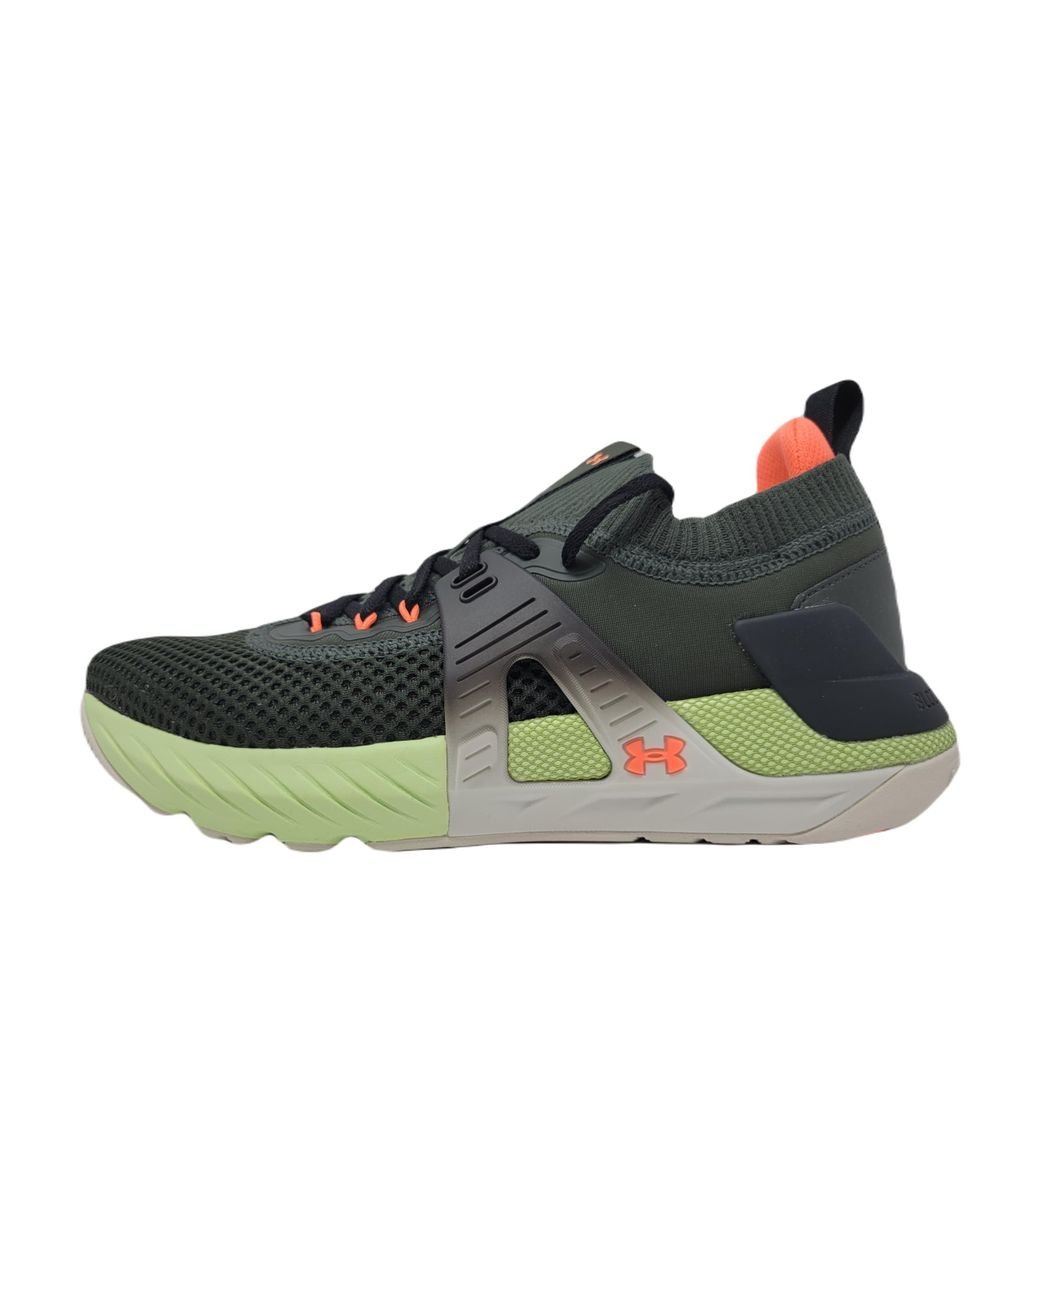 Under Armour Ua Project Rock 4 Training Shoes for Men